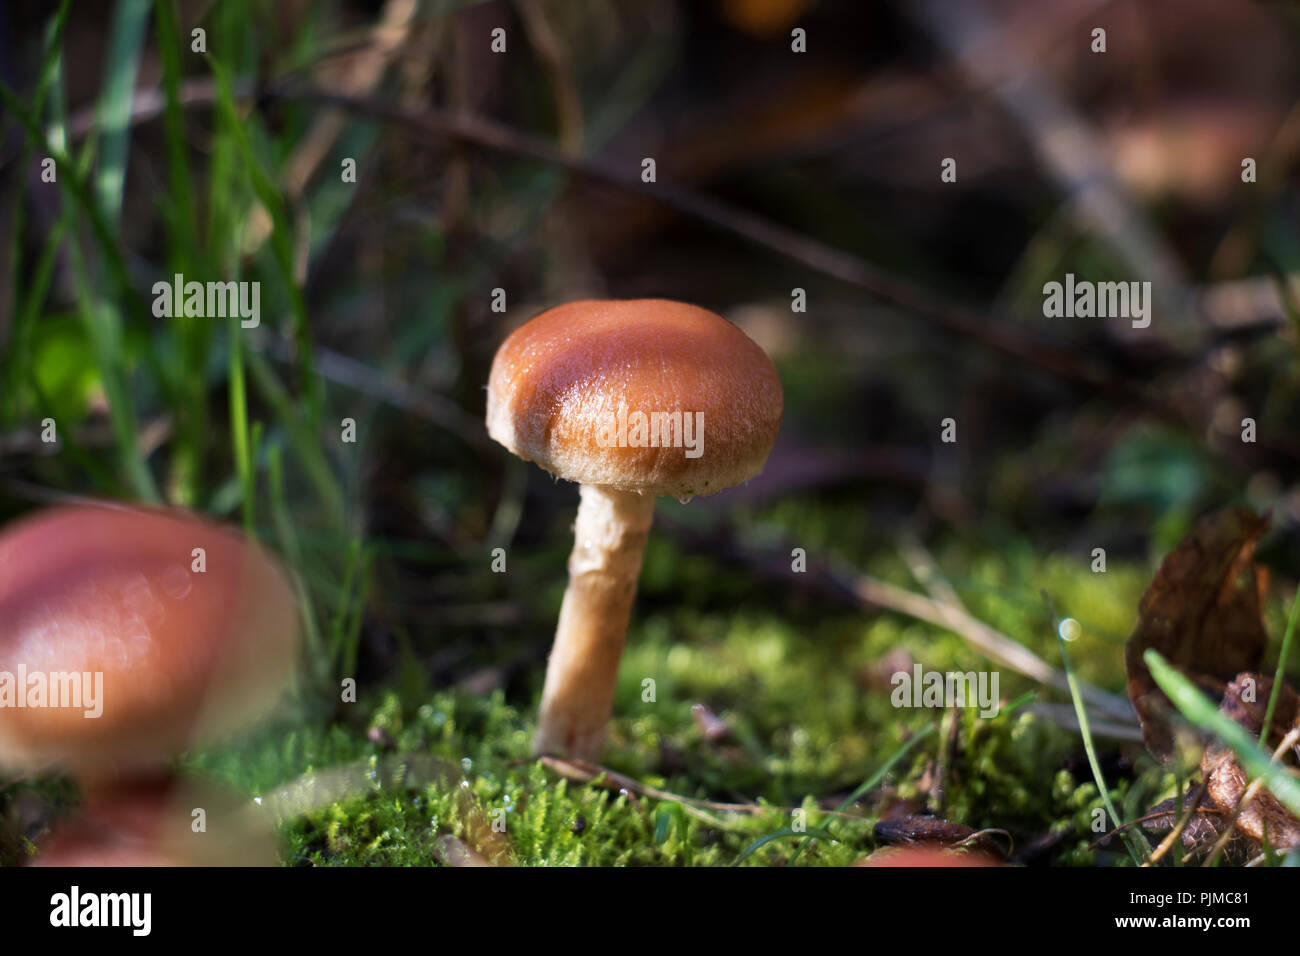 Mushroom growing on moss on the forest floor. Stock Photo